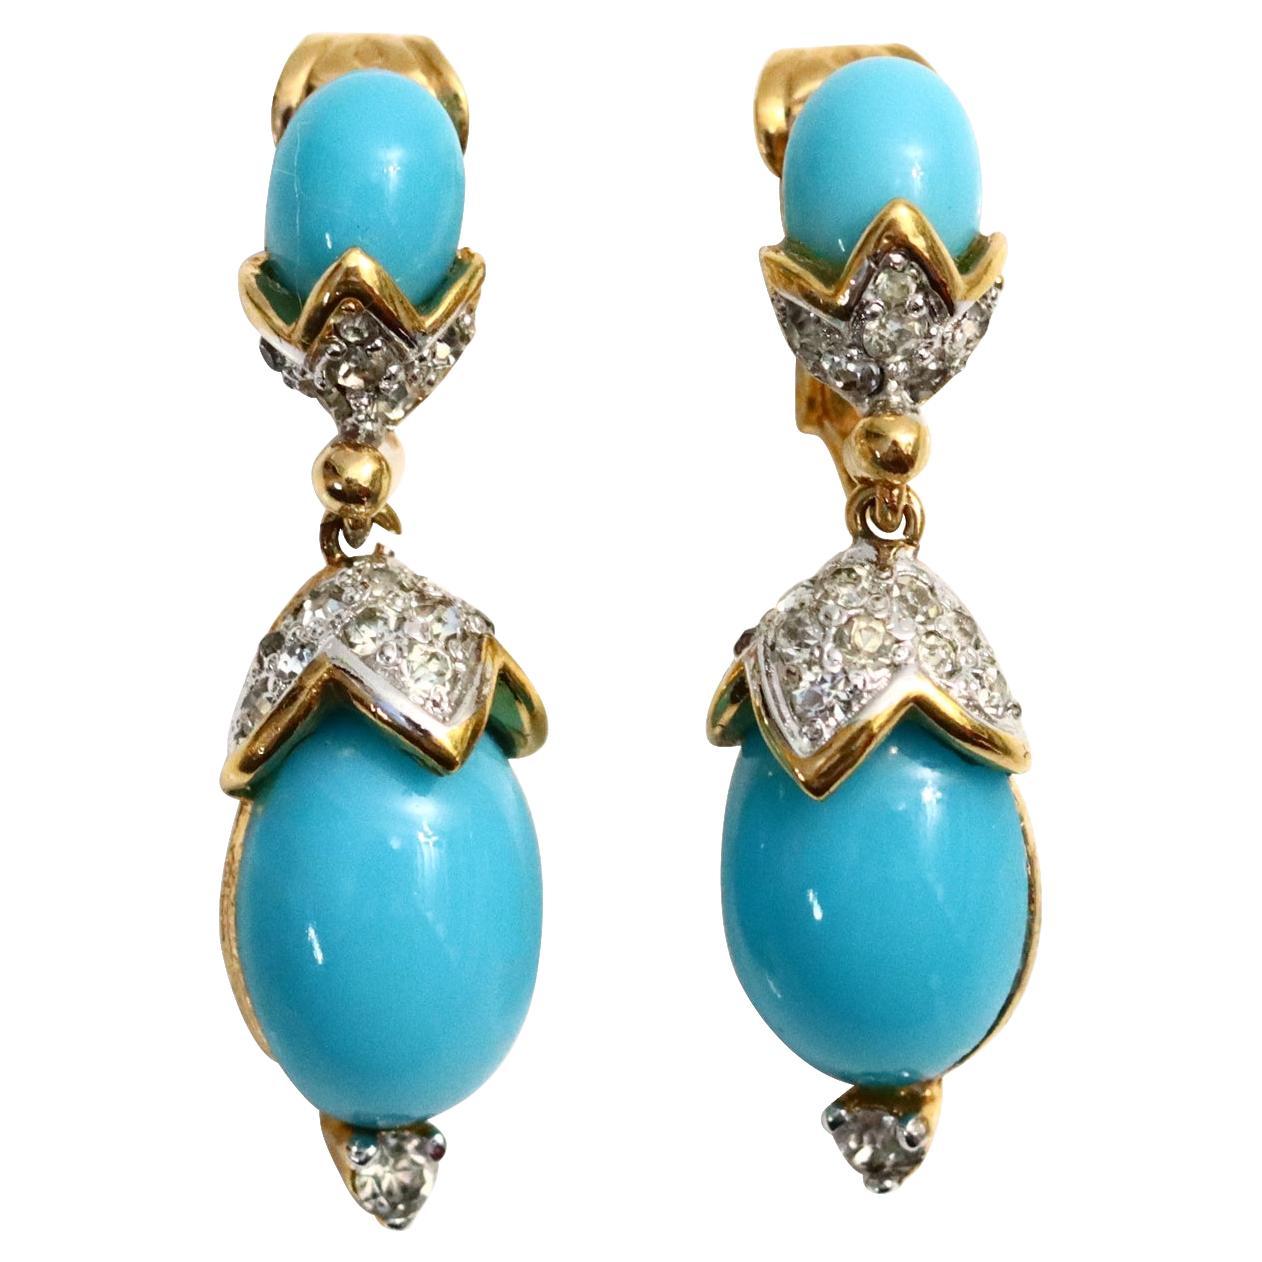 Vintage Panetta Faux Turquoise Dangling Earrings Circa 1980s